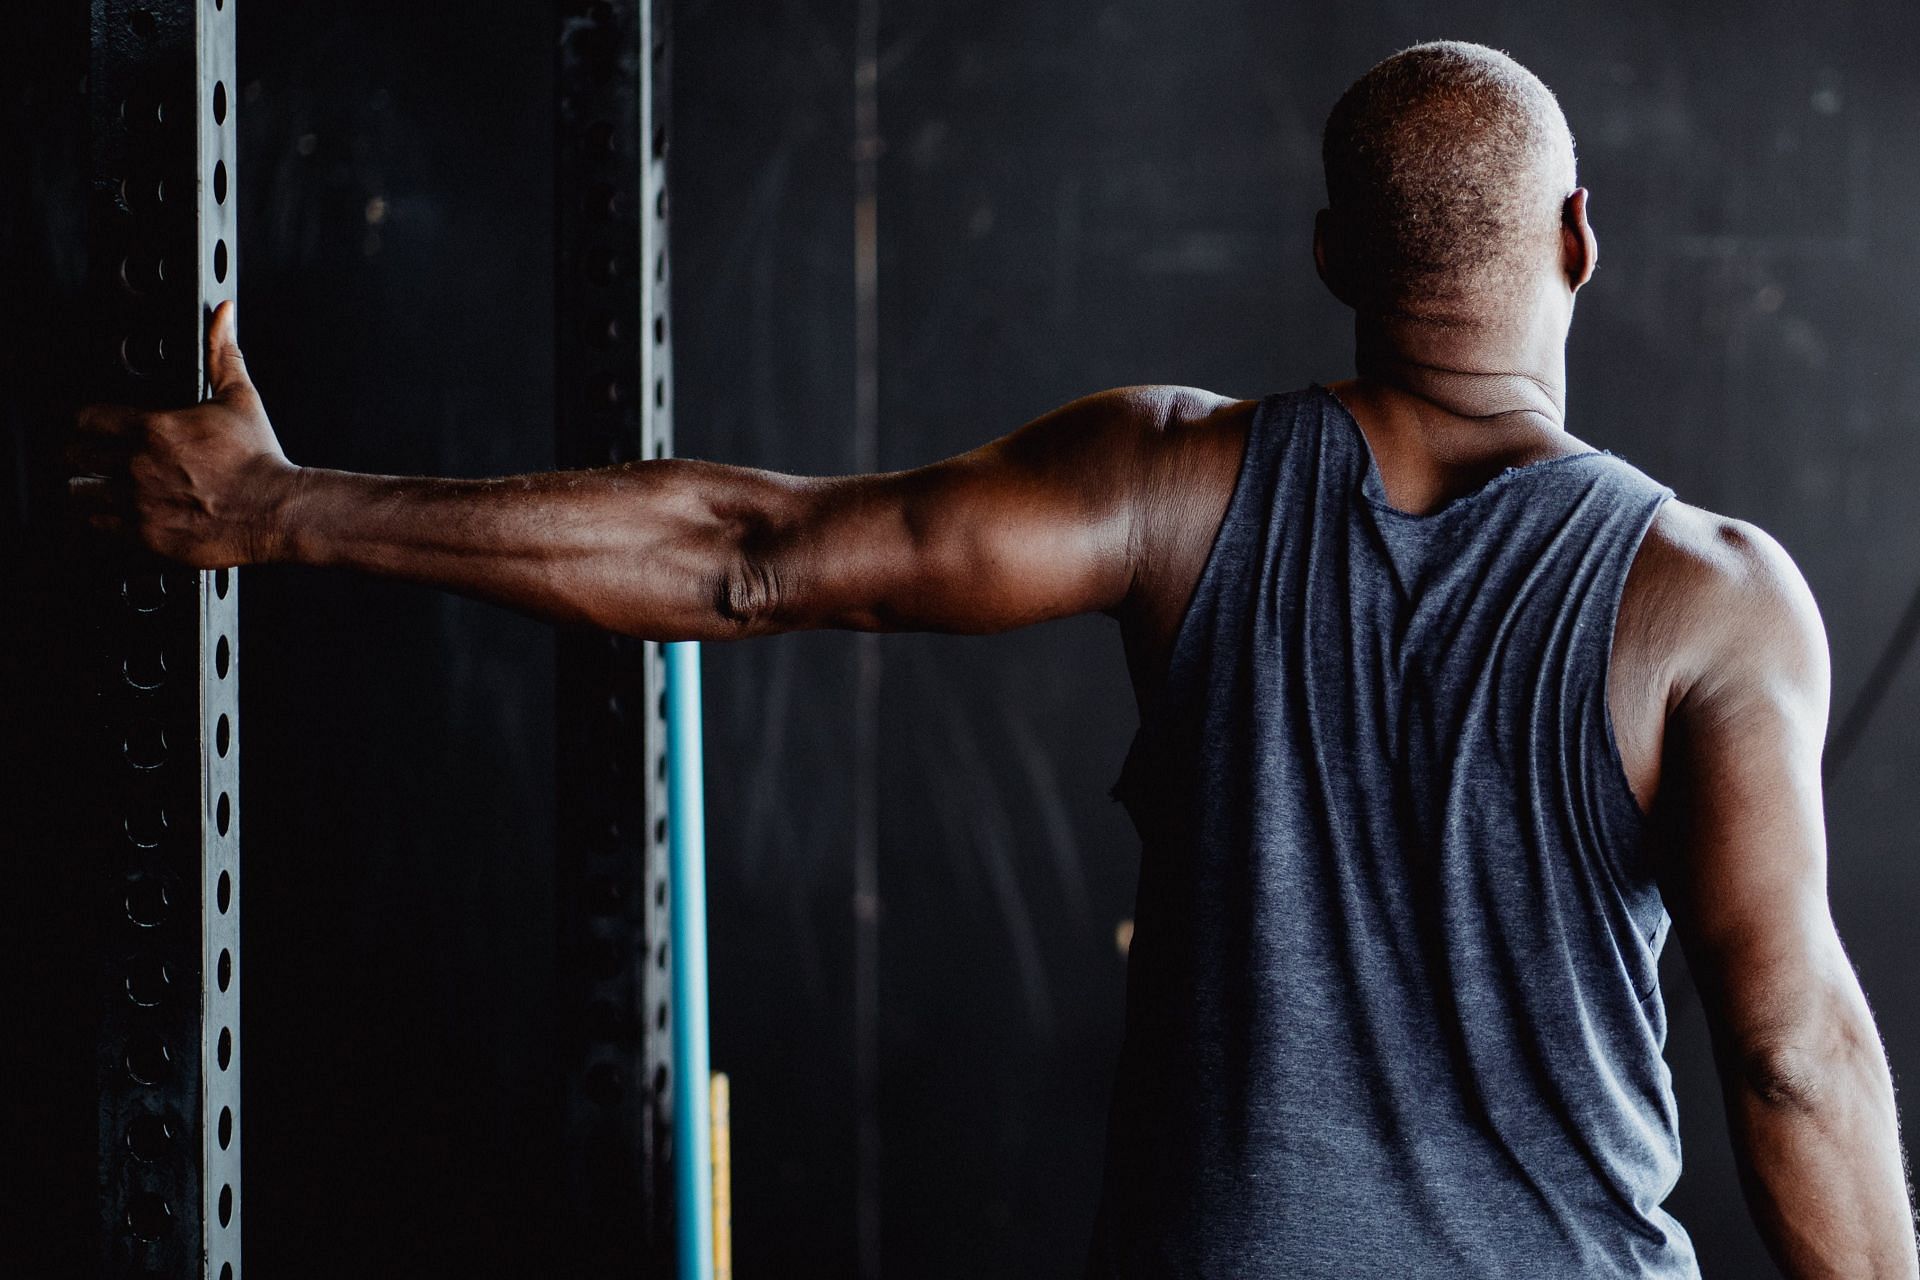 Top forearm exercise equipment (Image sourced via Pexels / Photo by Ketut)